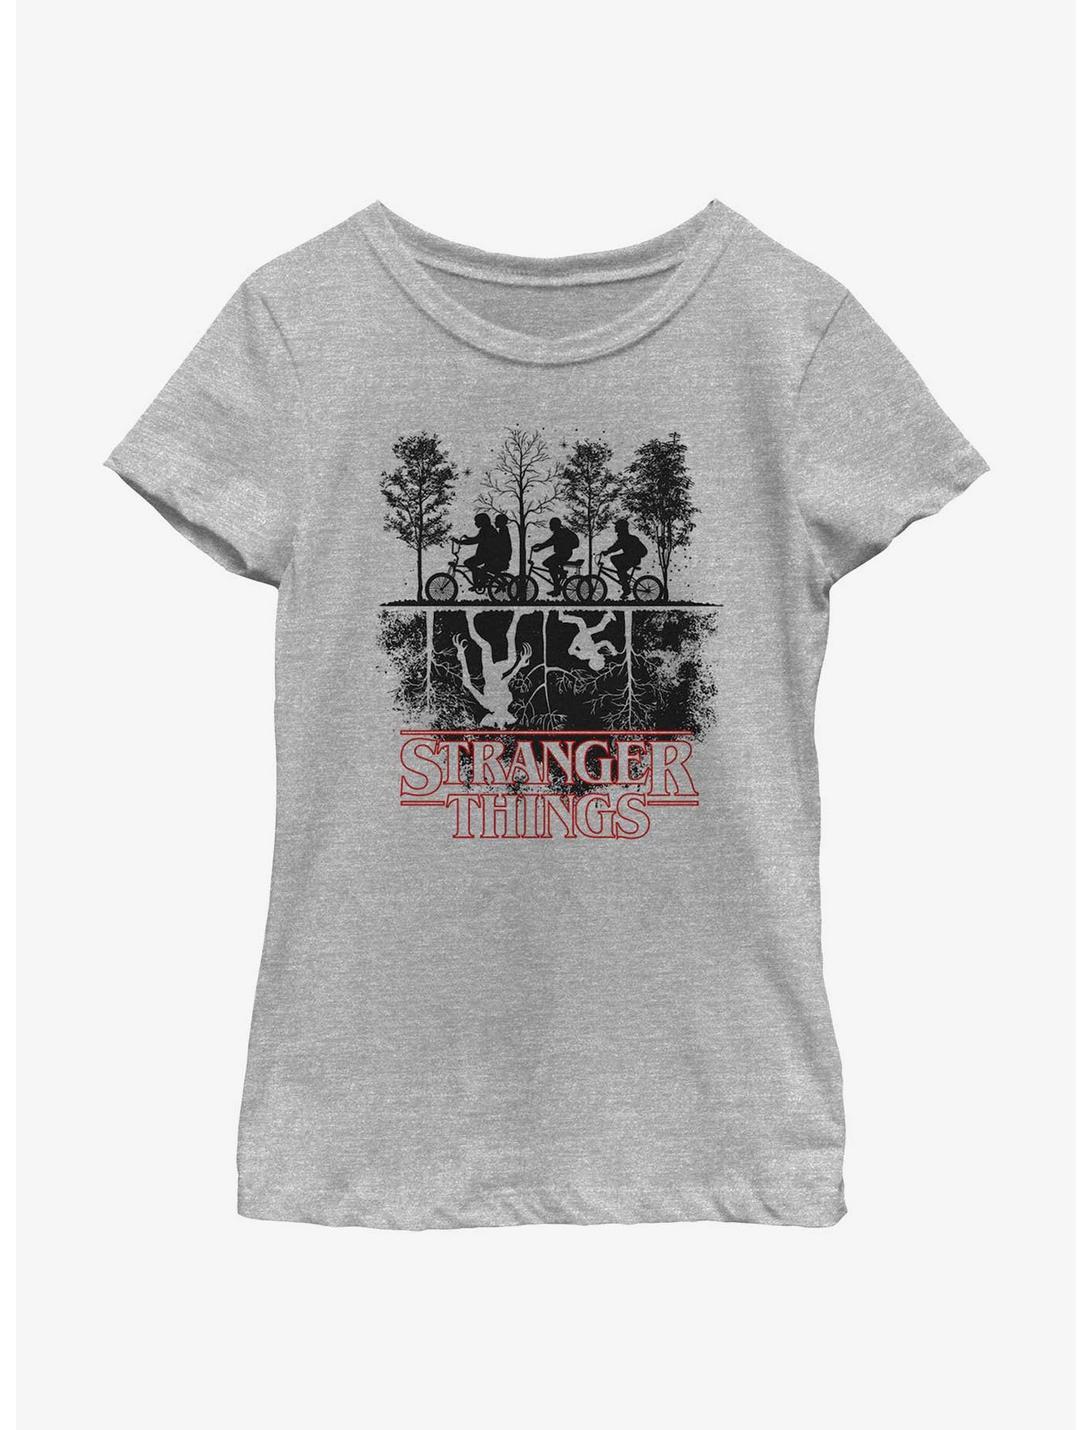 Stranger Things Upside Down Silhouette Youth Girls T-Shirt, ATH HTR, hi-res